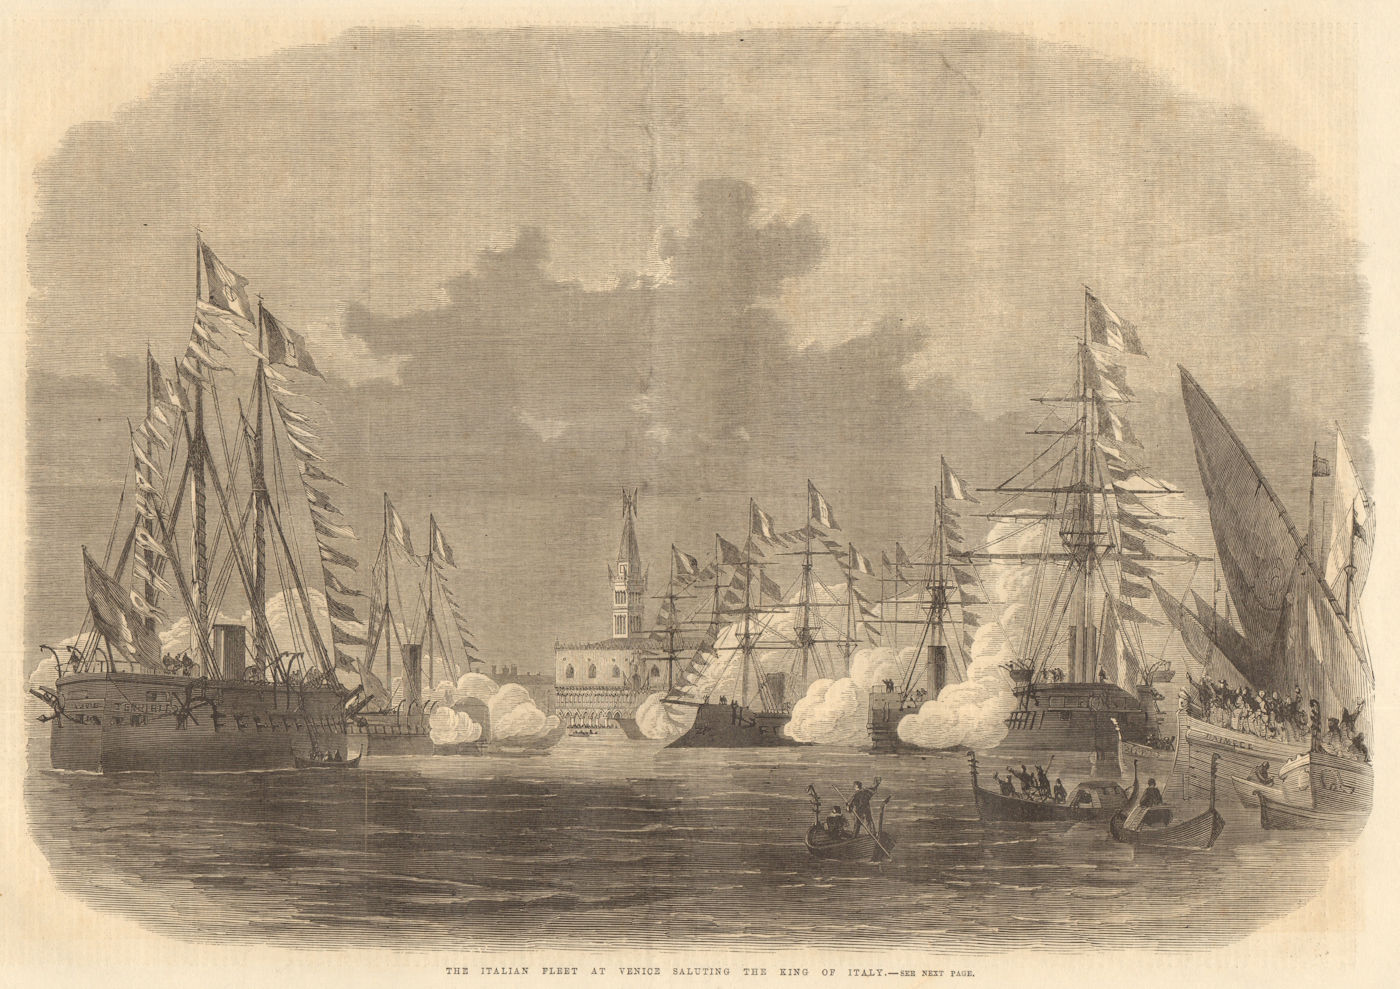 Associate Product The Italian fleet at Venice saluting the King of Italy. Ships 1866 ILN print